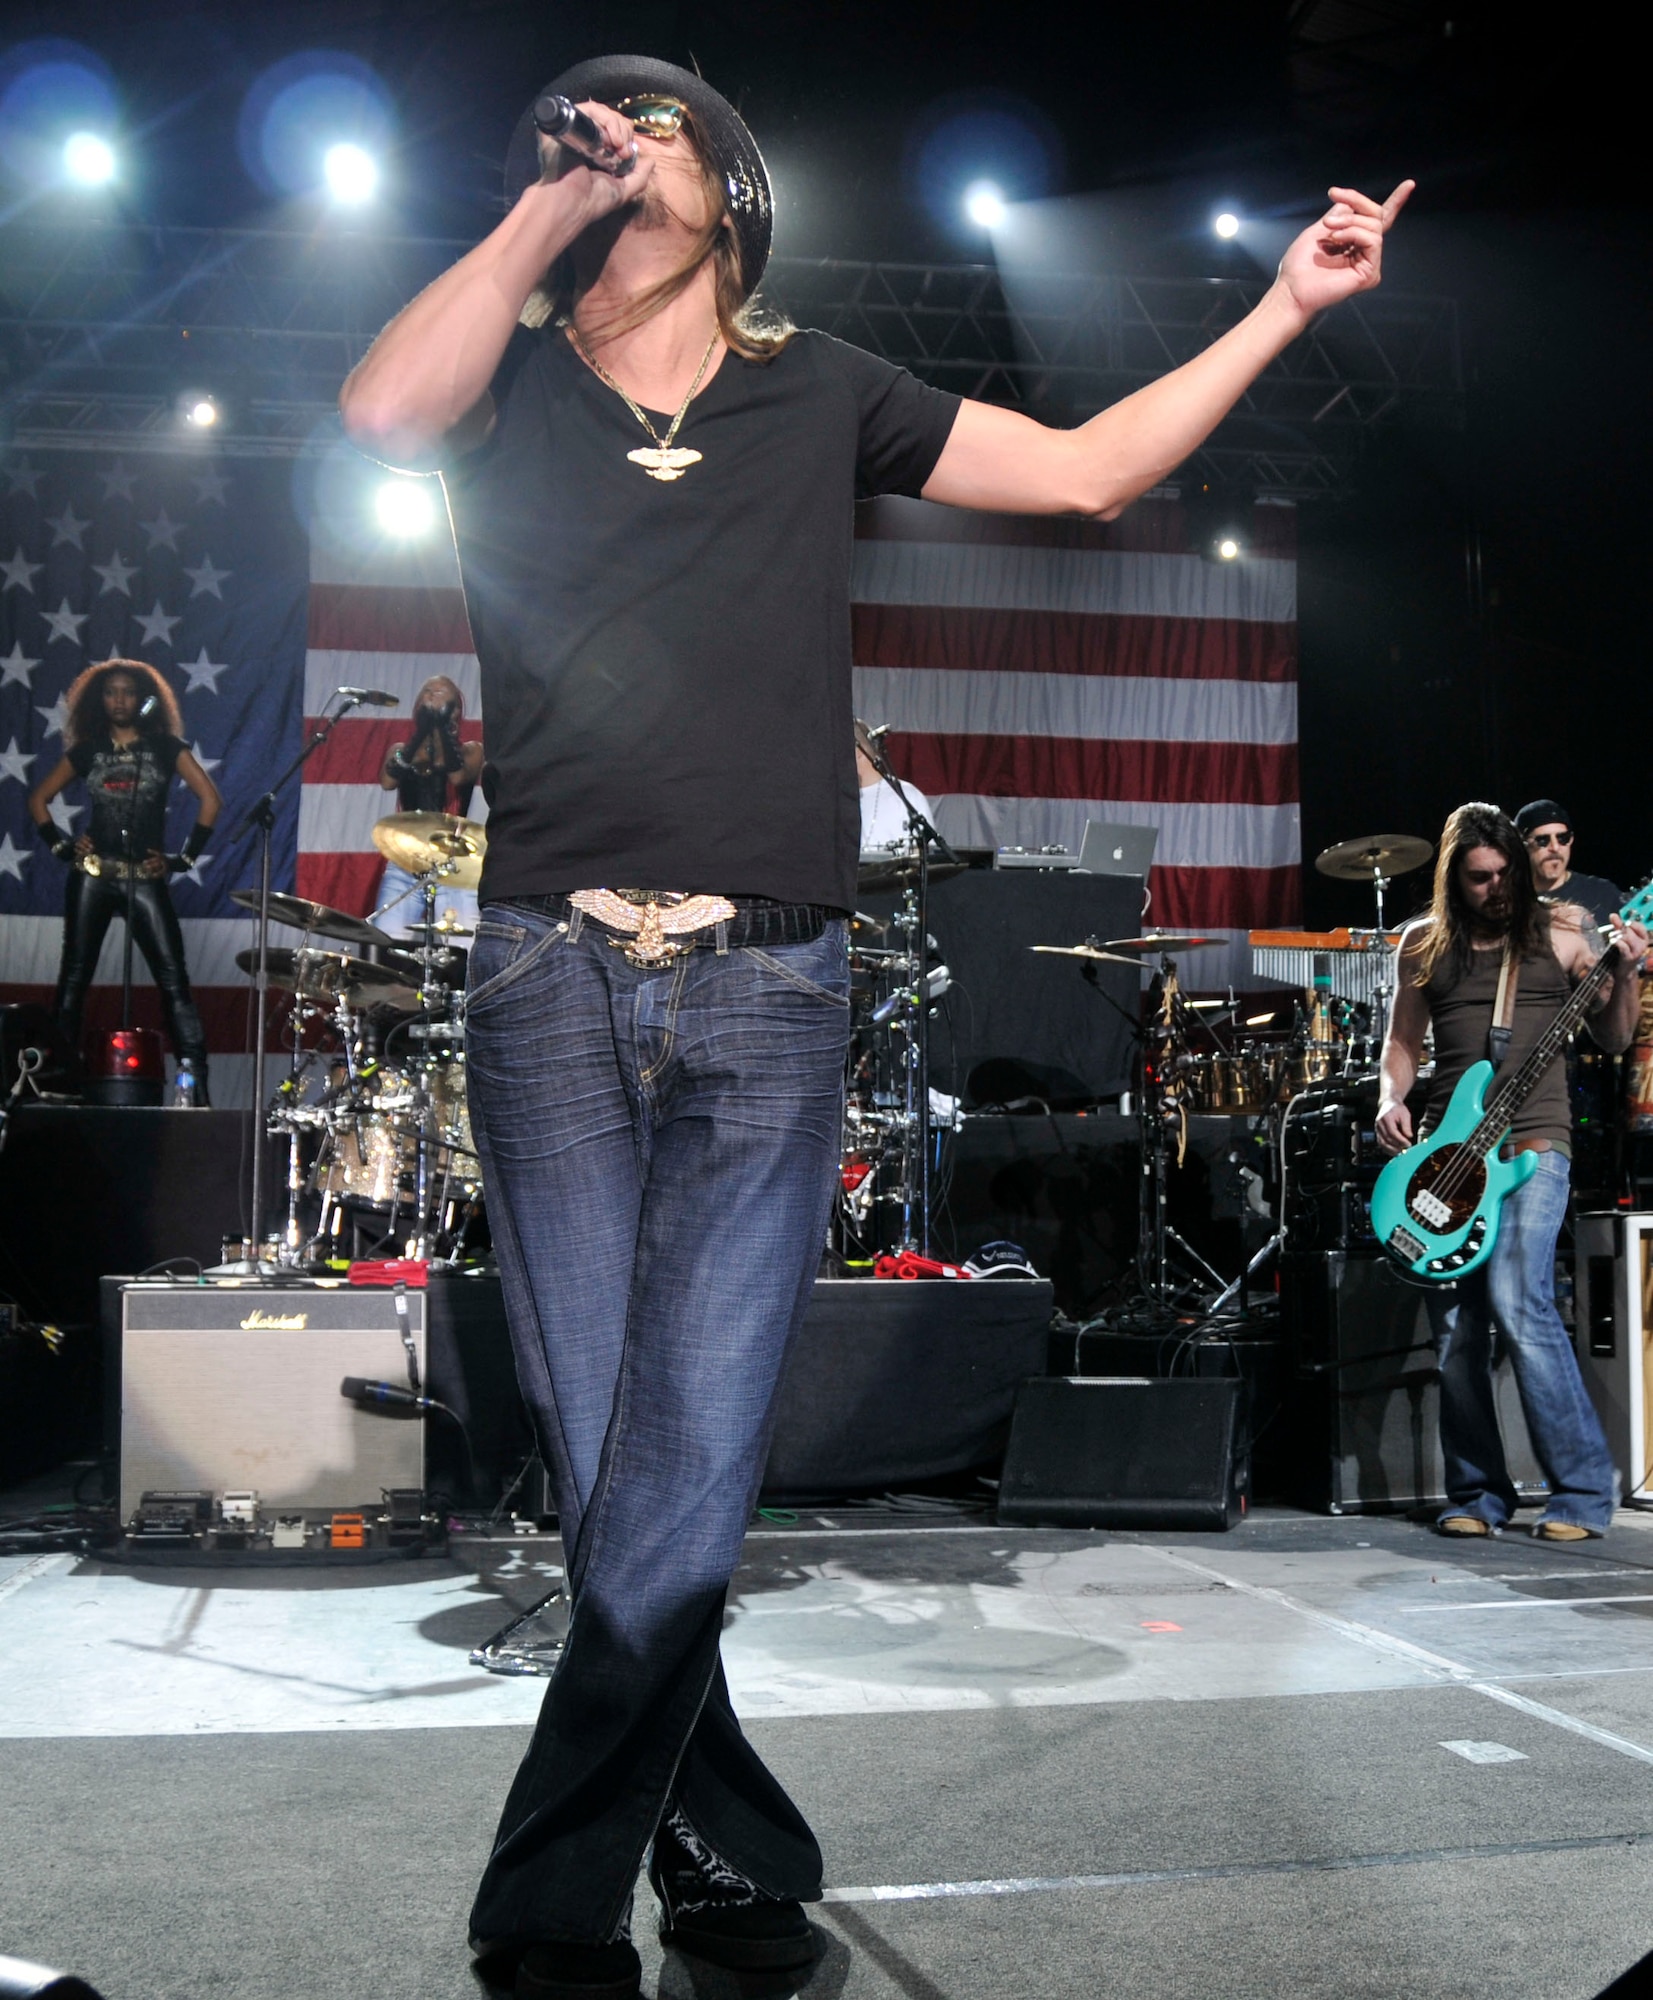 Music artist Kid Rock performs during the Tour for the Troops 2009 concert in Hangar 7 at RAF Lakenheath, England, Dec. 11.  Kid Rock was joined by comedian Carlos Mencia and singer Jessie James as they toured bases in Europe and Southwest Asia to show their appreciation and support for the military.  (U.S. Air Force photo by Tech. Sgt. Chris Stagner)